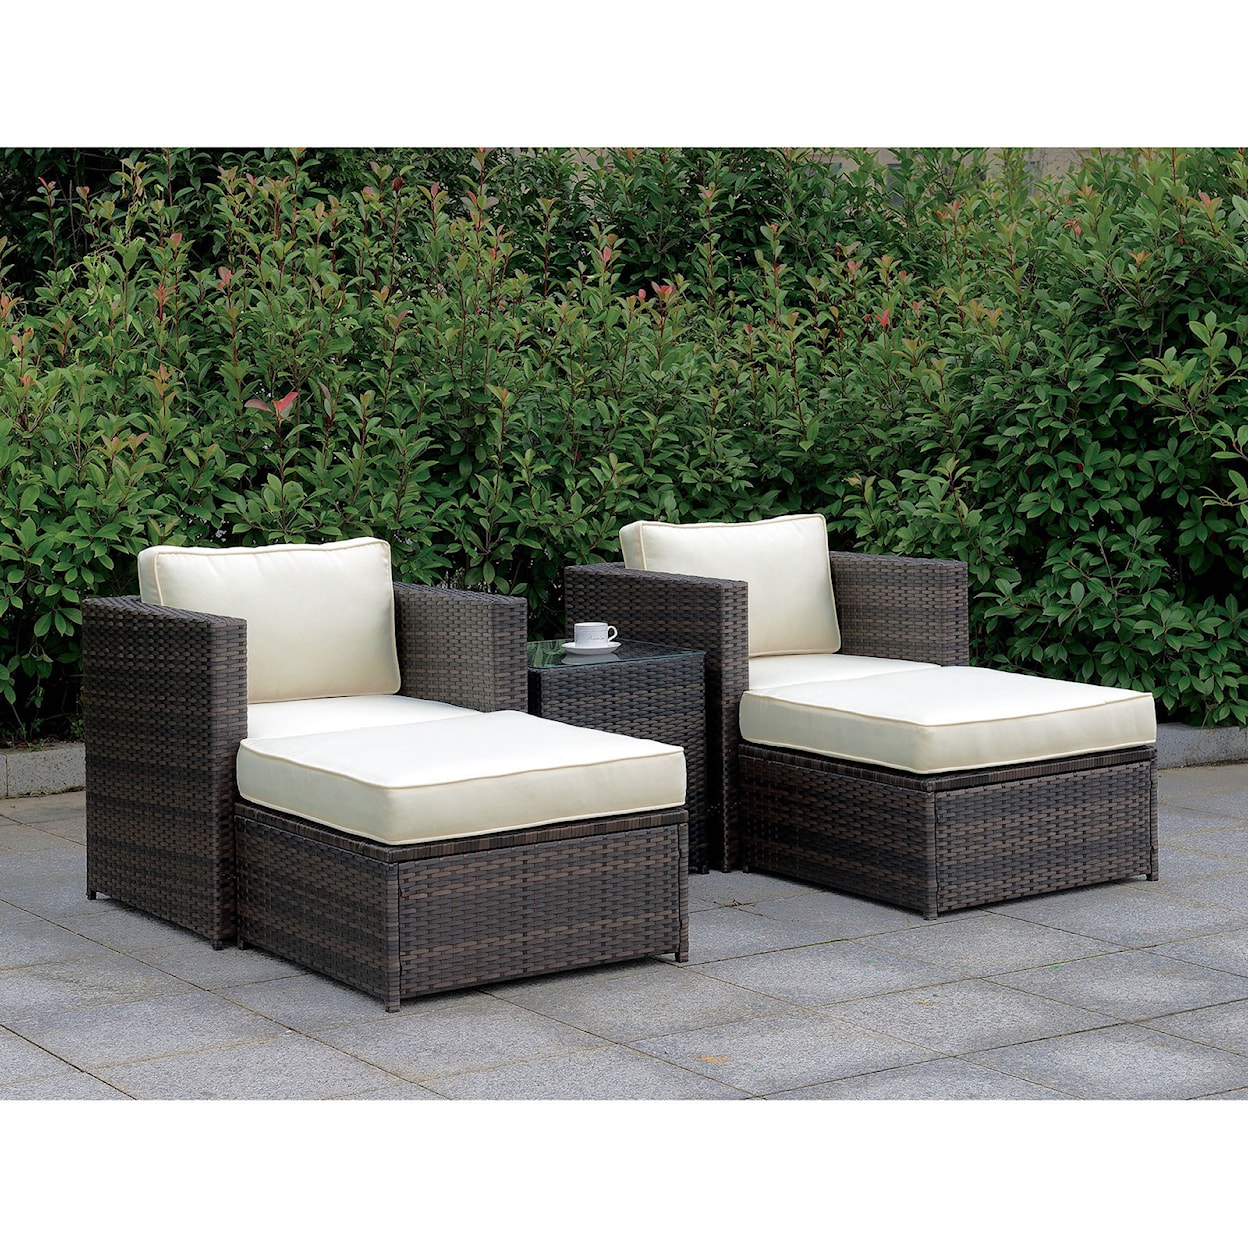 Furniture of America Ilona Outdoor Chair, Ottoman and End Table Set